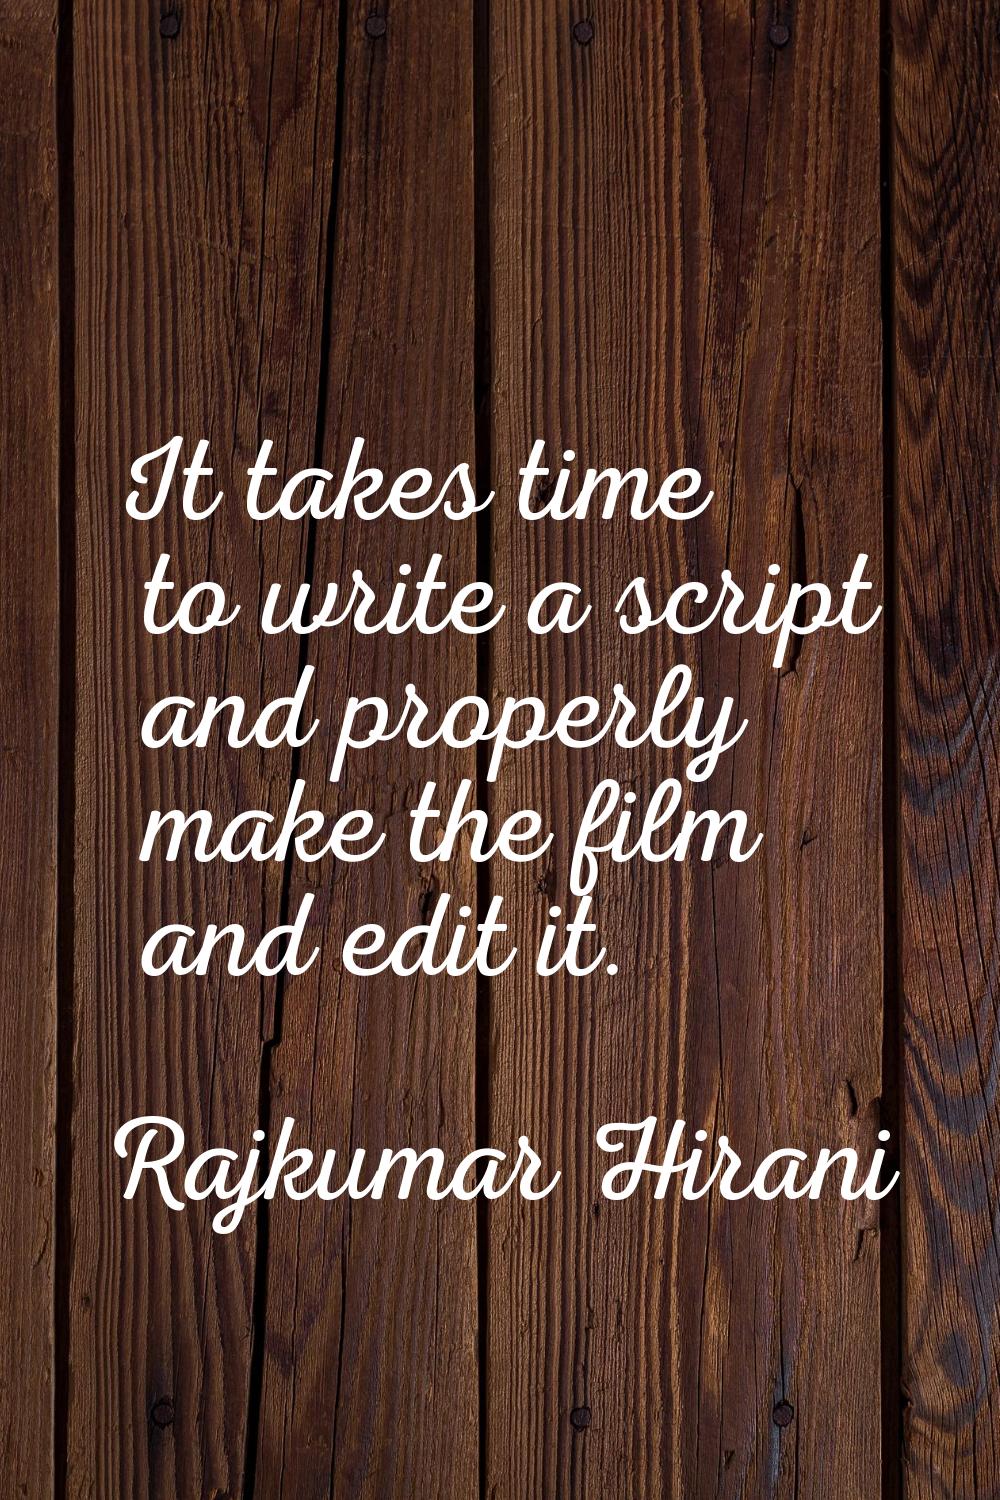 It takes time to write a script and properly make the film and edit it.